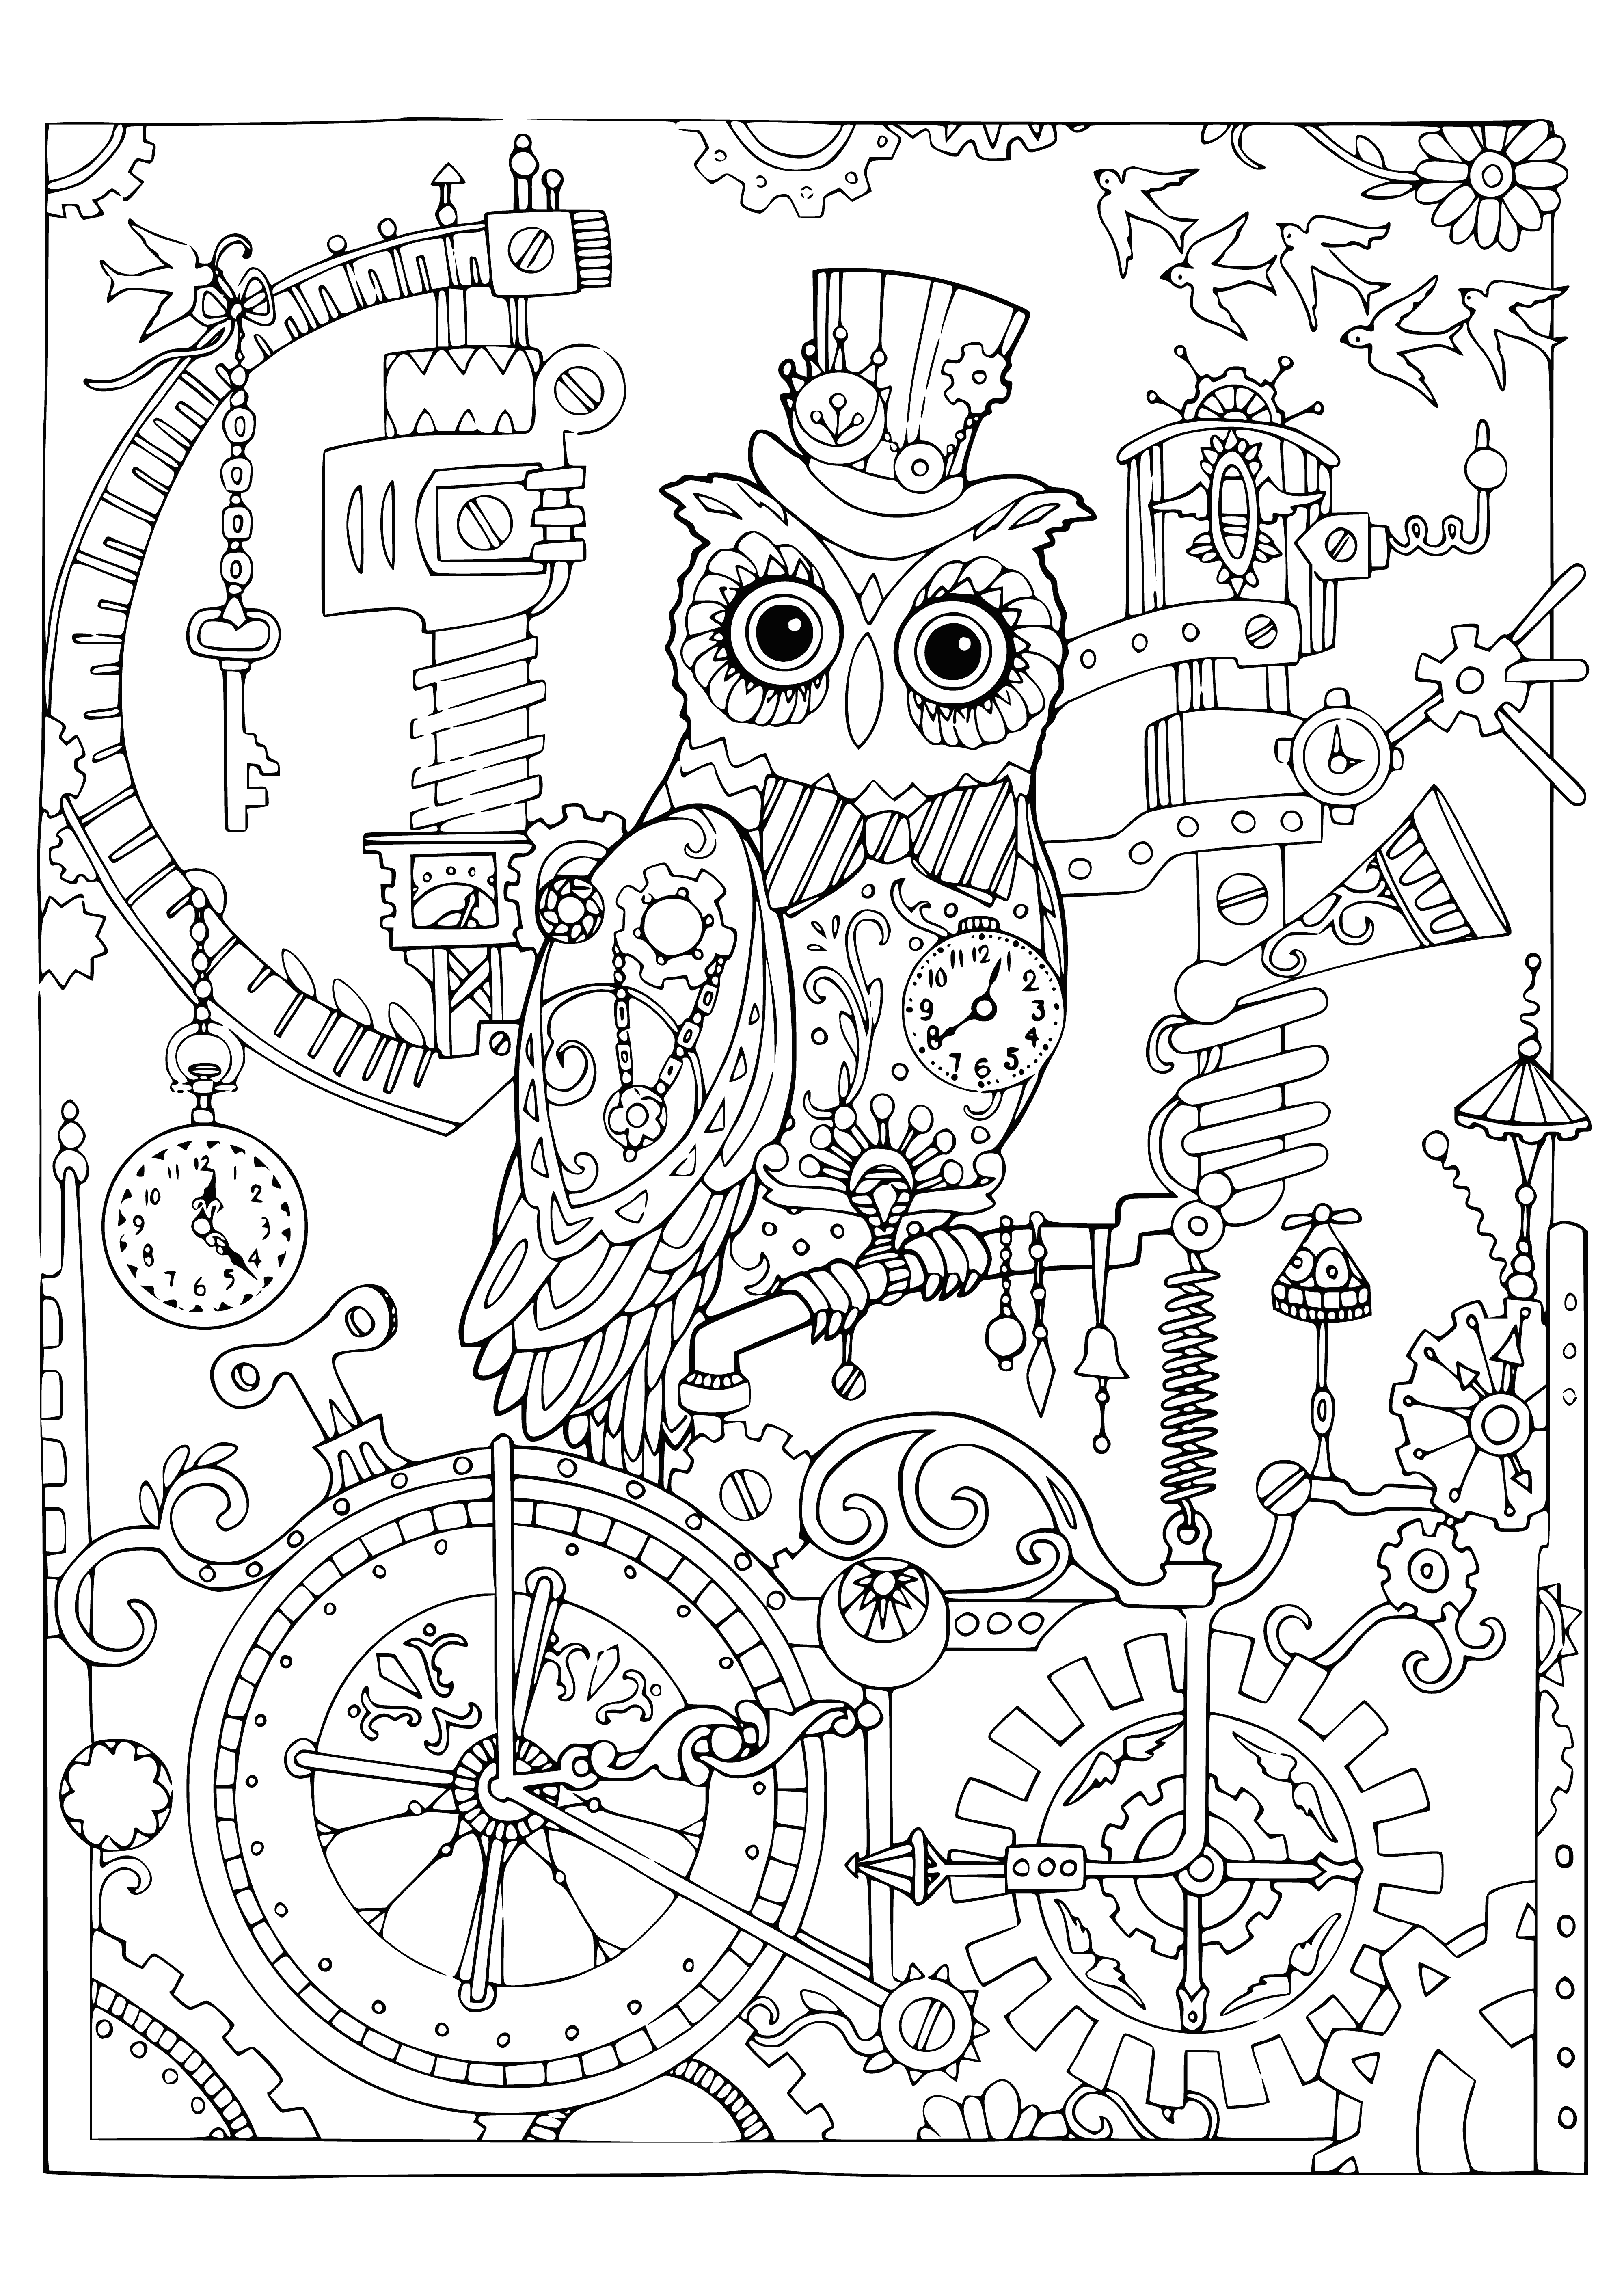 Steampunk coloring page